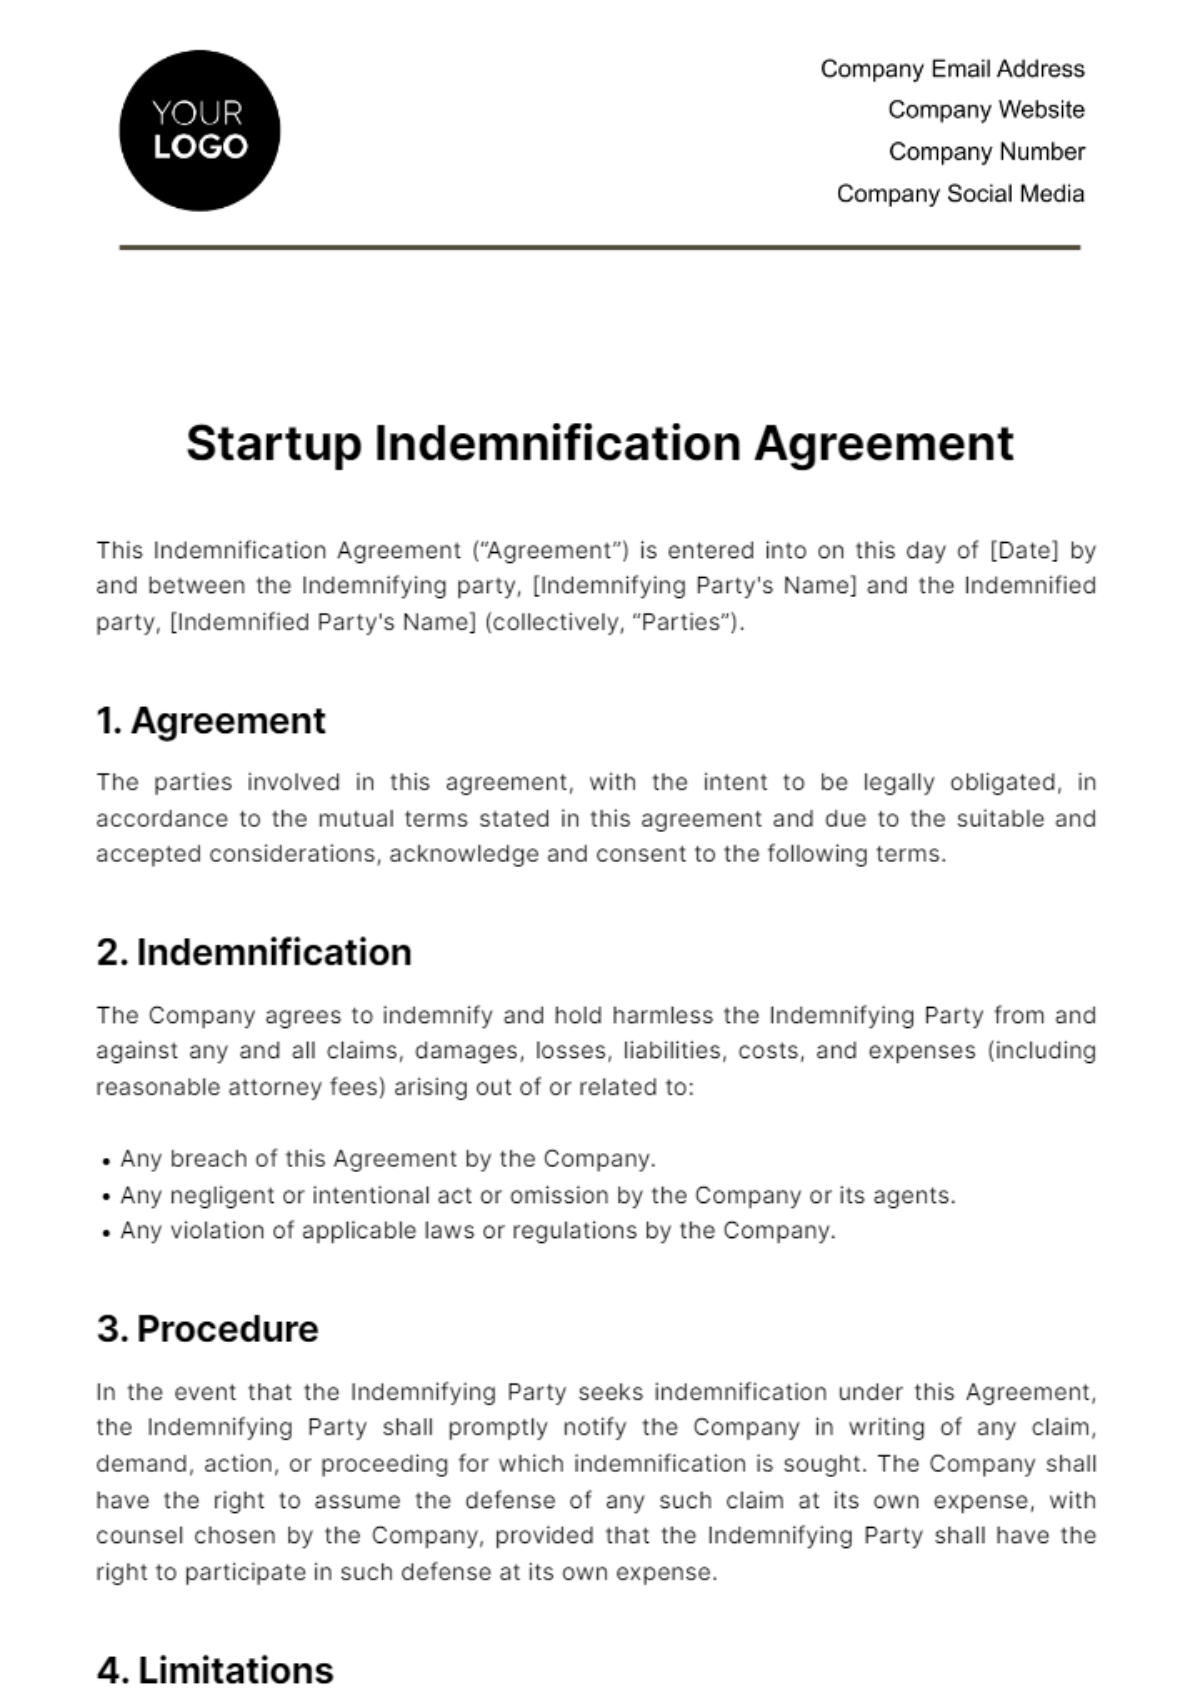 Startup Indemnification Agreement Template